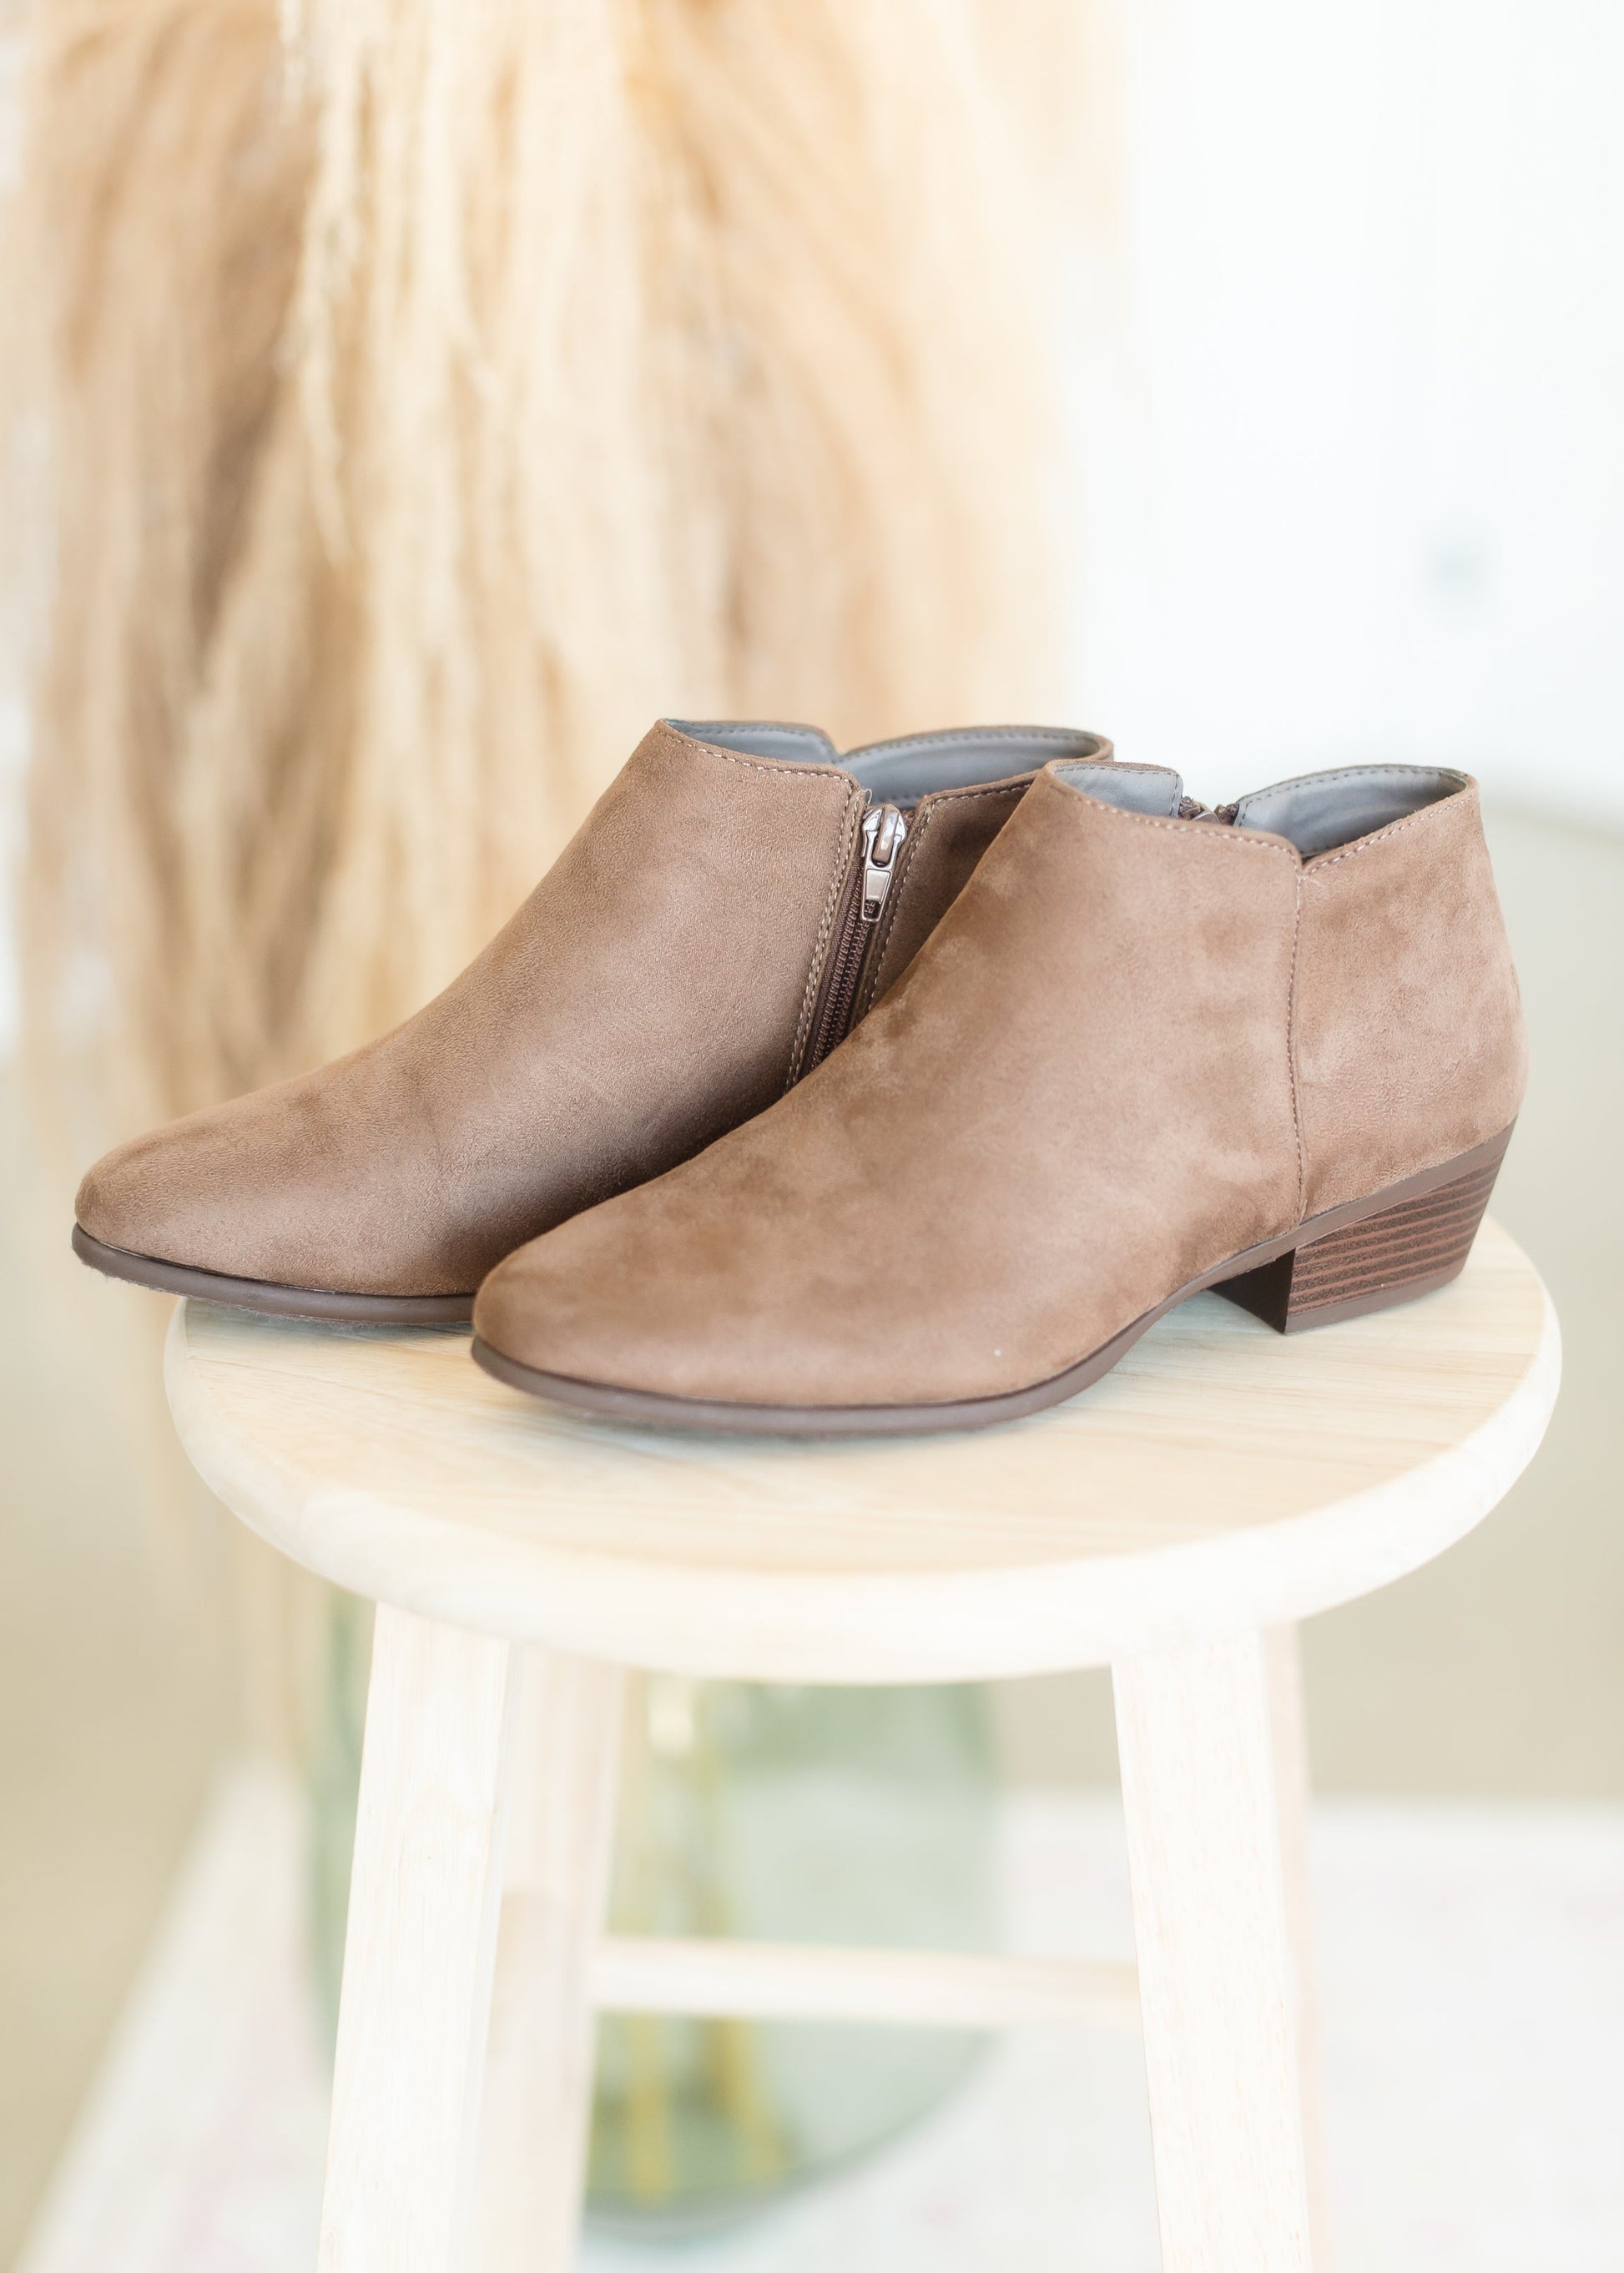 Taupe Block Heel Ankle Bootie - FINAL SALE Accessories